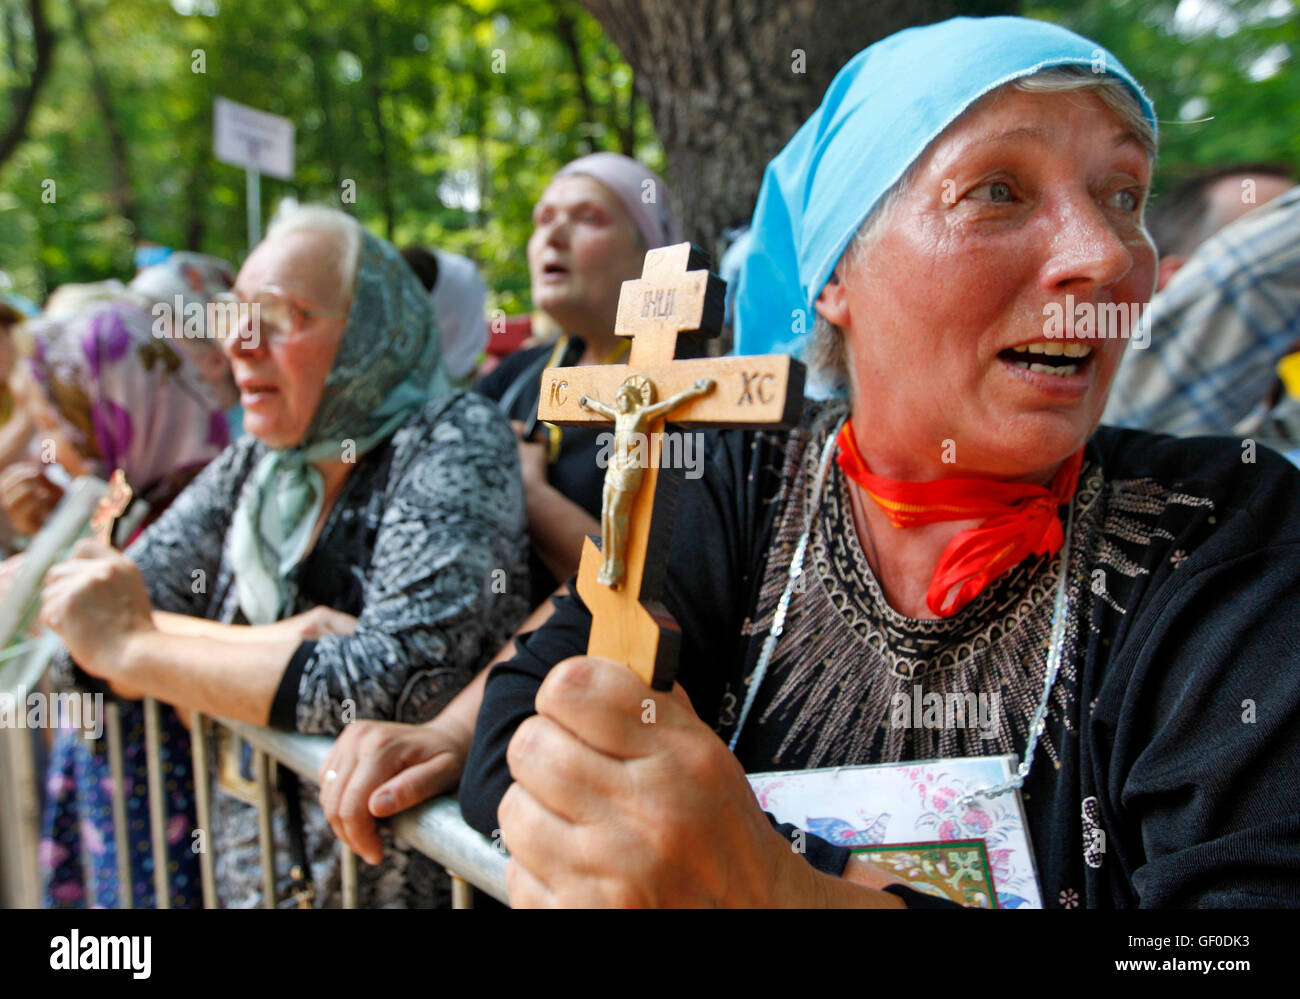 Ukrainian believers of Ukrainian Orthodox Church of Moscow Patriarchy attend a prayer service at the St. Vladimir's Hill in Kiev, on July 27, 2016. Ukrainian believers, priests and nuns of Ukrainian Orthodox Church of Moscow Patriarchy took part in a procession of the cross to mark the anniversary of the Baptism of Kievan Rus in Kiev. But supporters of the Ukrainian Orthodox Church of Kiev Patriarchy believe that the procession of the cross is organized by pro-Russian powers to destabilize the political situation in the country (Photo by Vasyl Shevchenko/ Pacific Press) Stock Photo